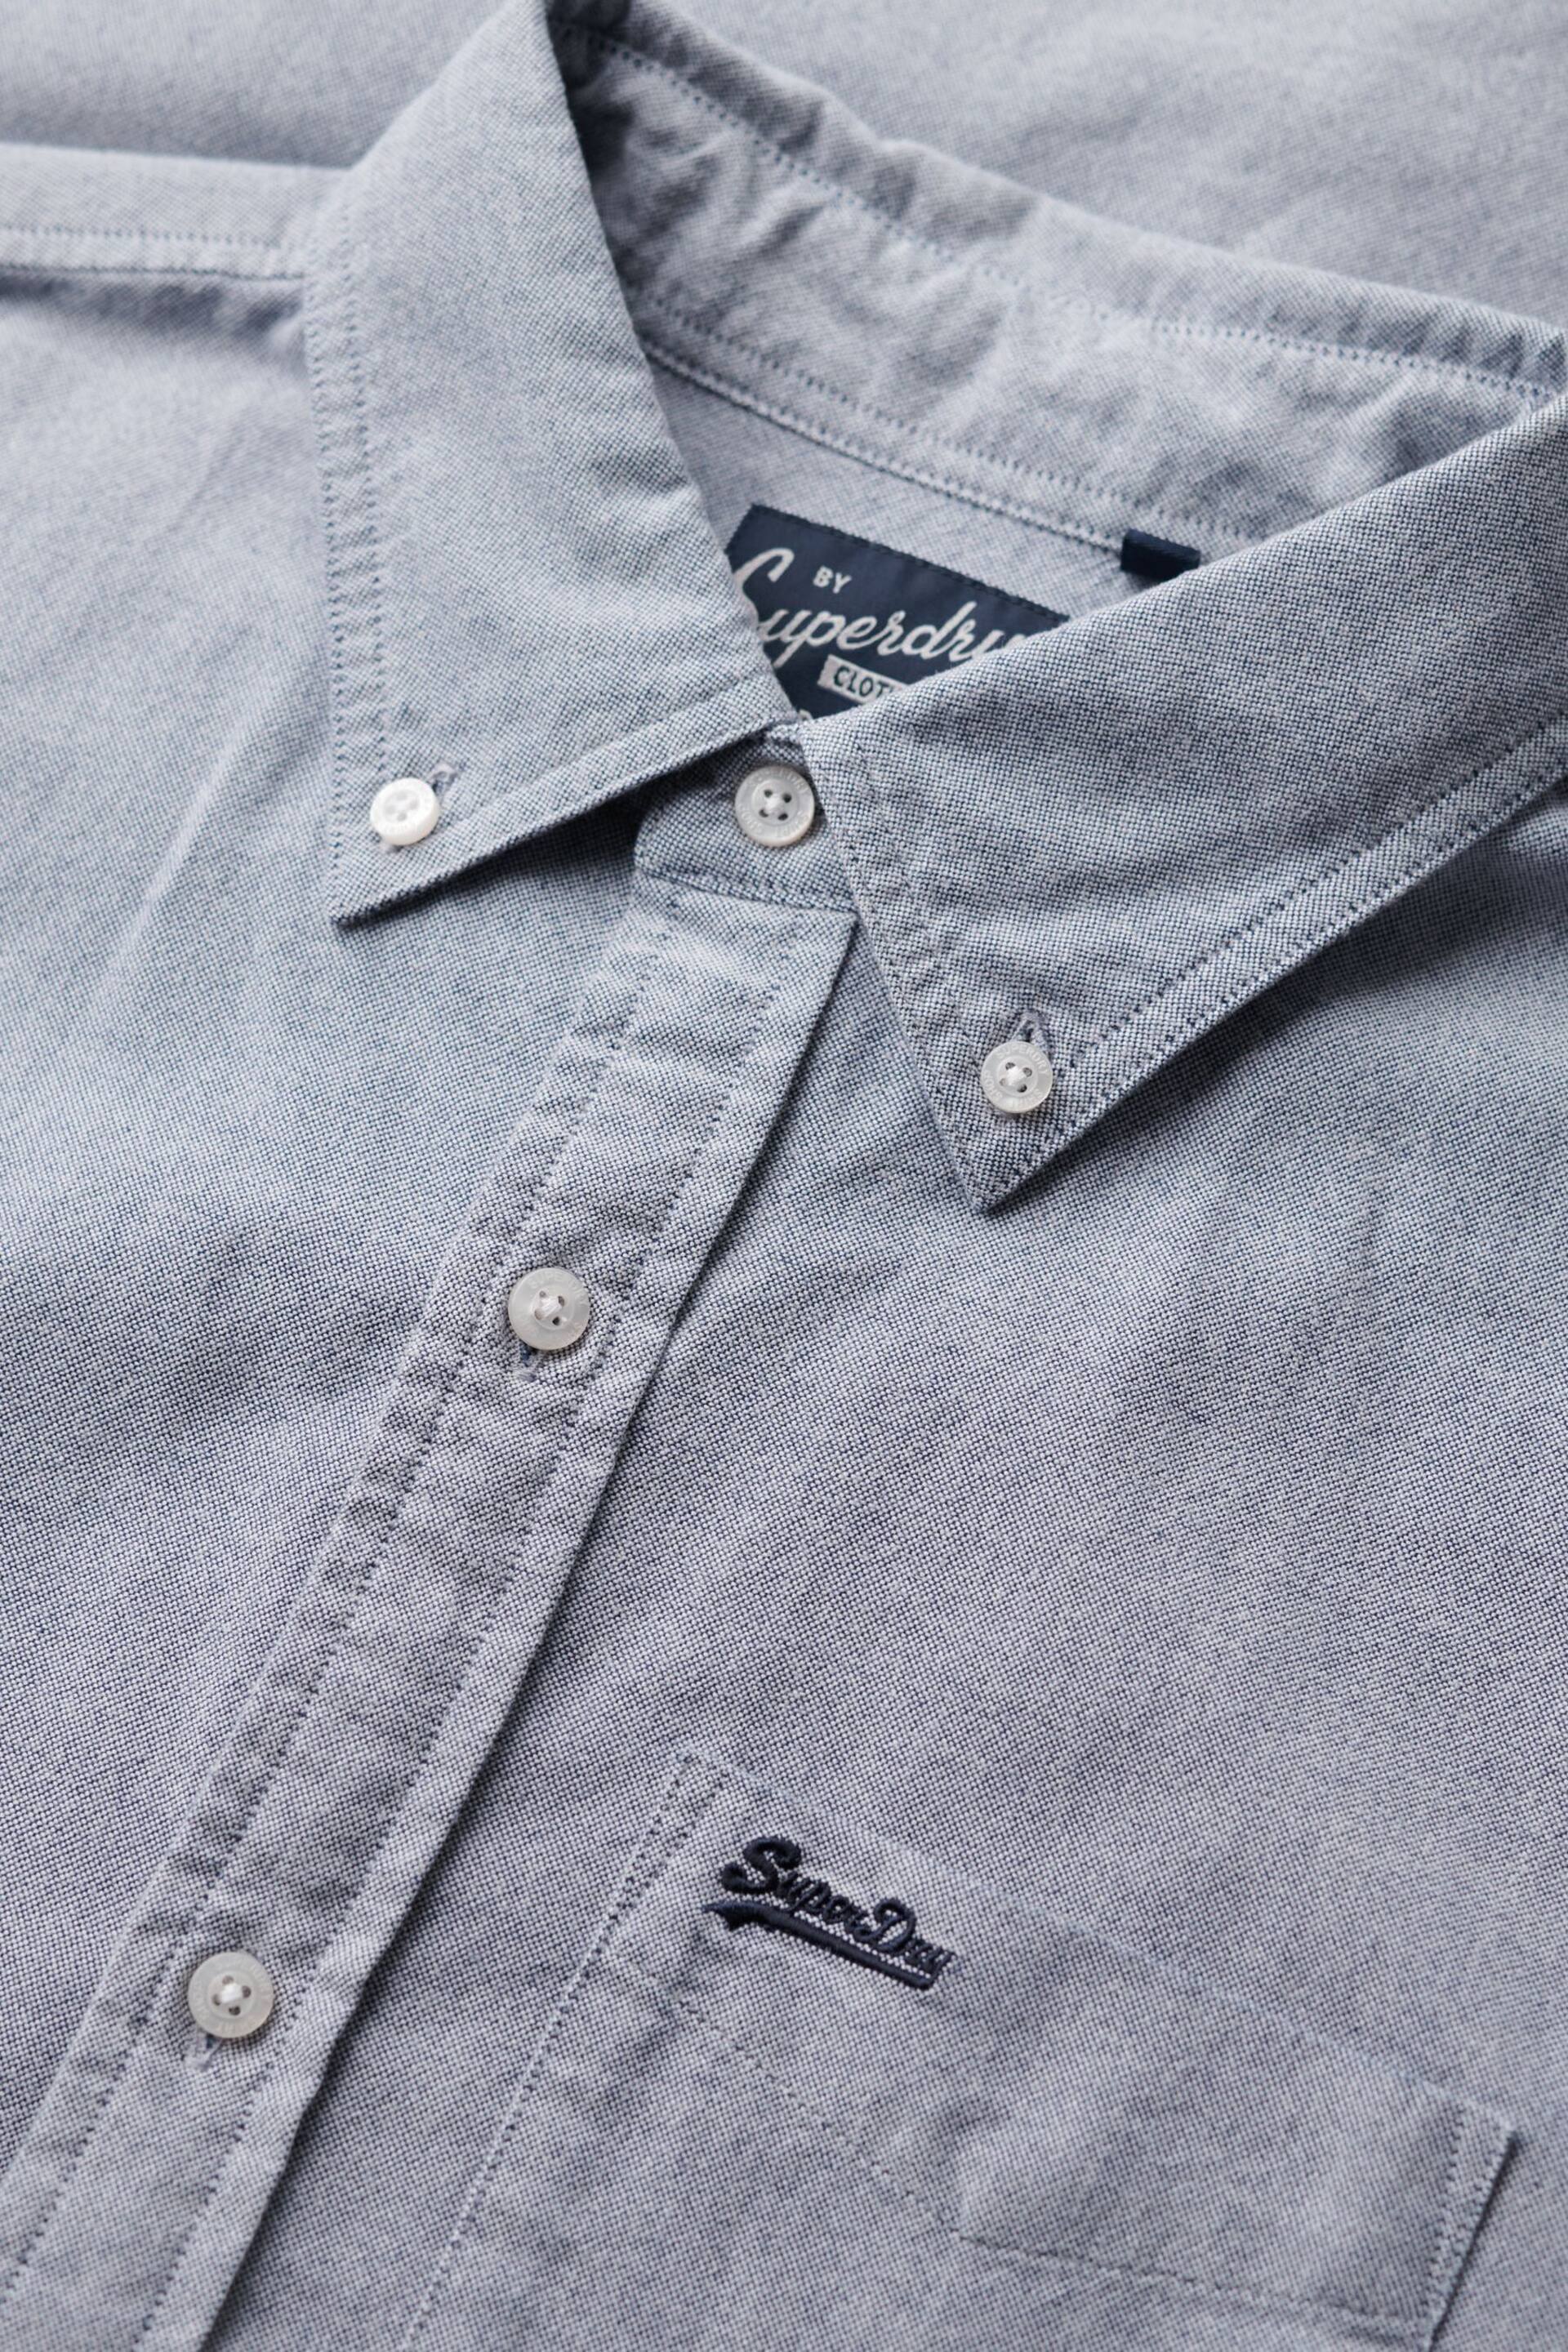 Superdry Blue Cotton Long Sleeved Oxford Shirt - Image 5 of 6